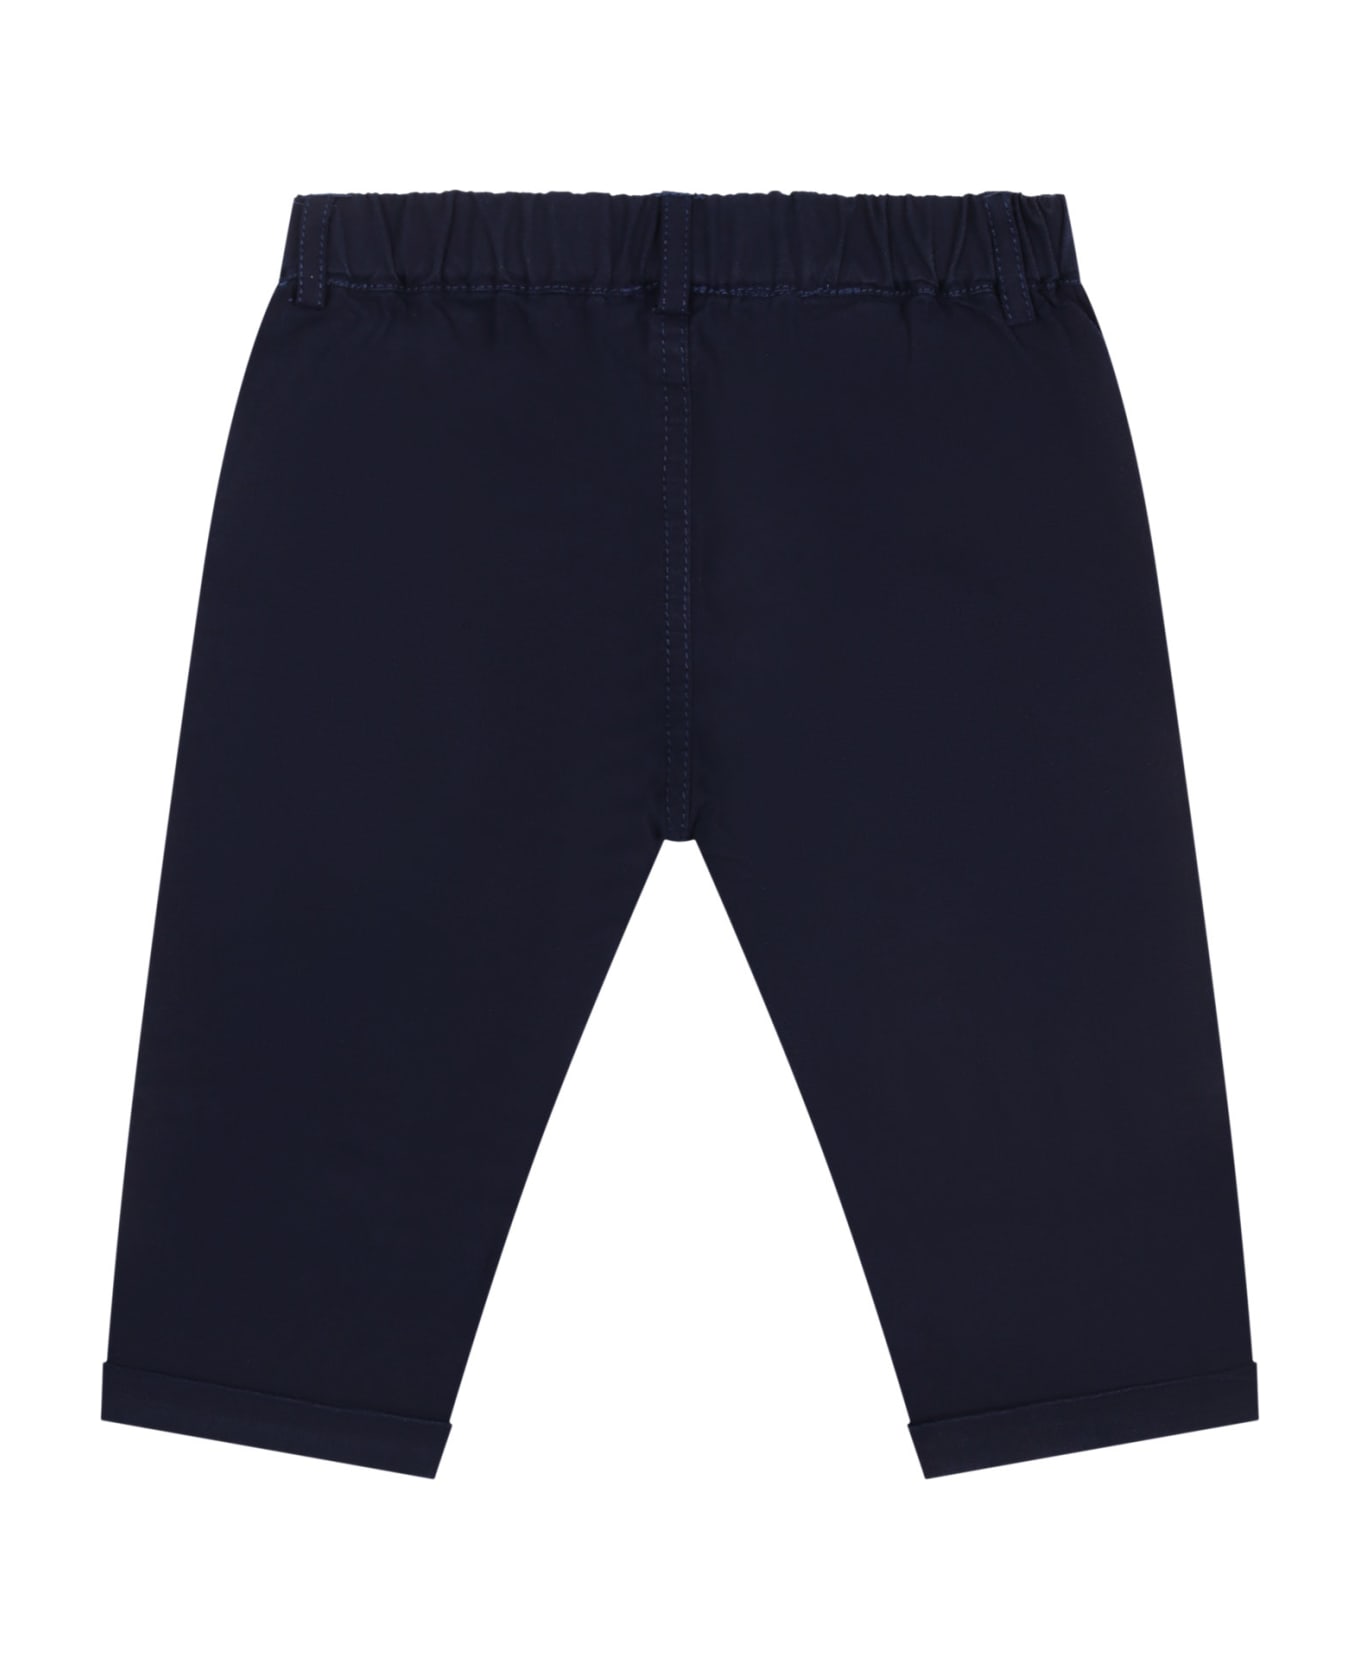 Moschino Blue Trousers For Baby Boy With Teddy Bear And Logo - Blue ボトムス